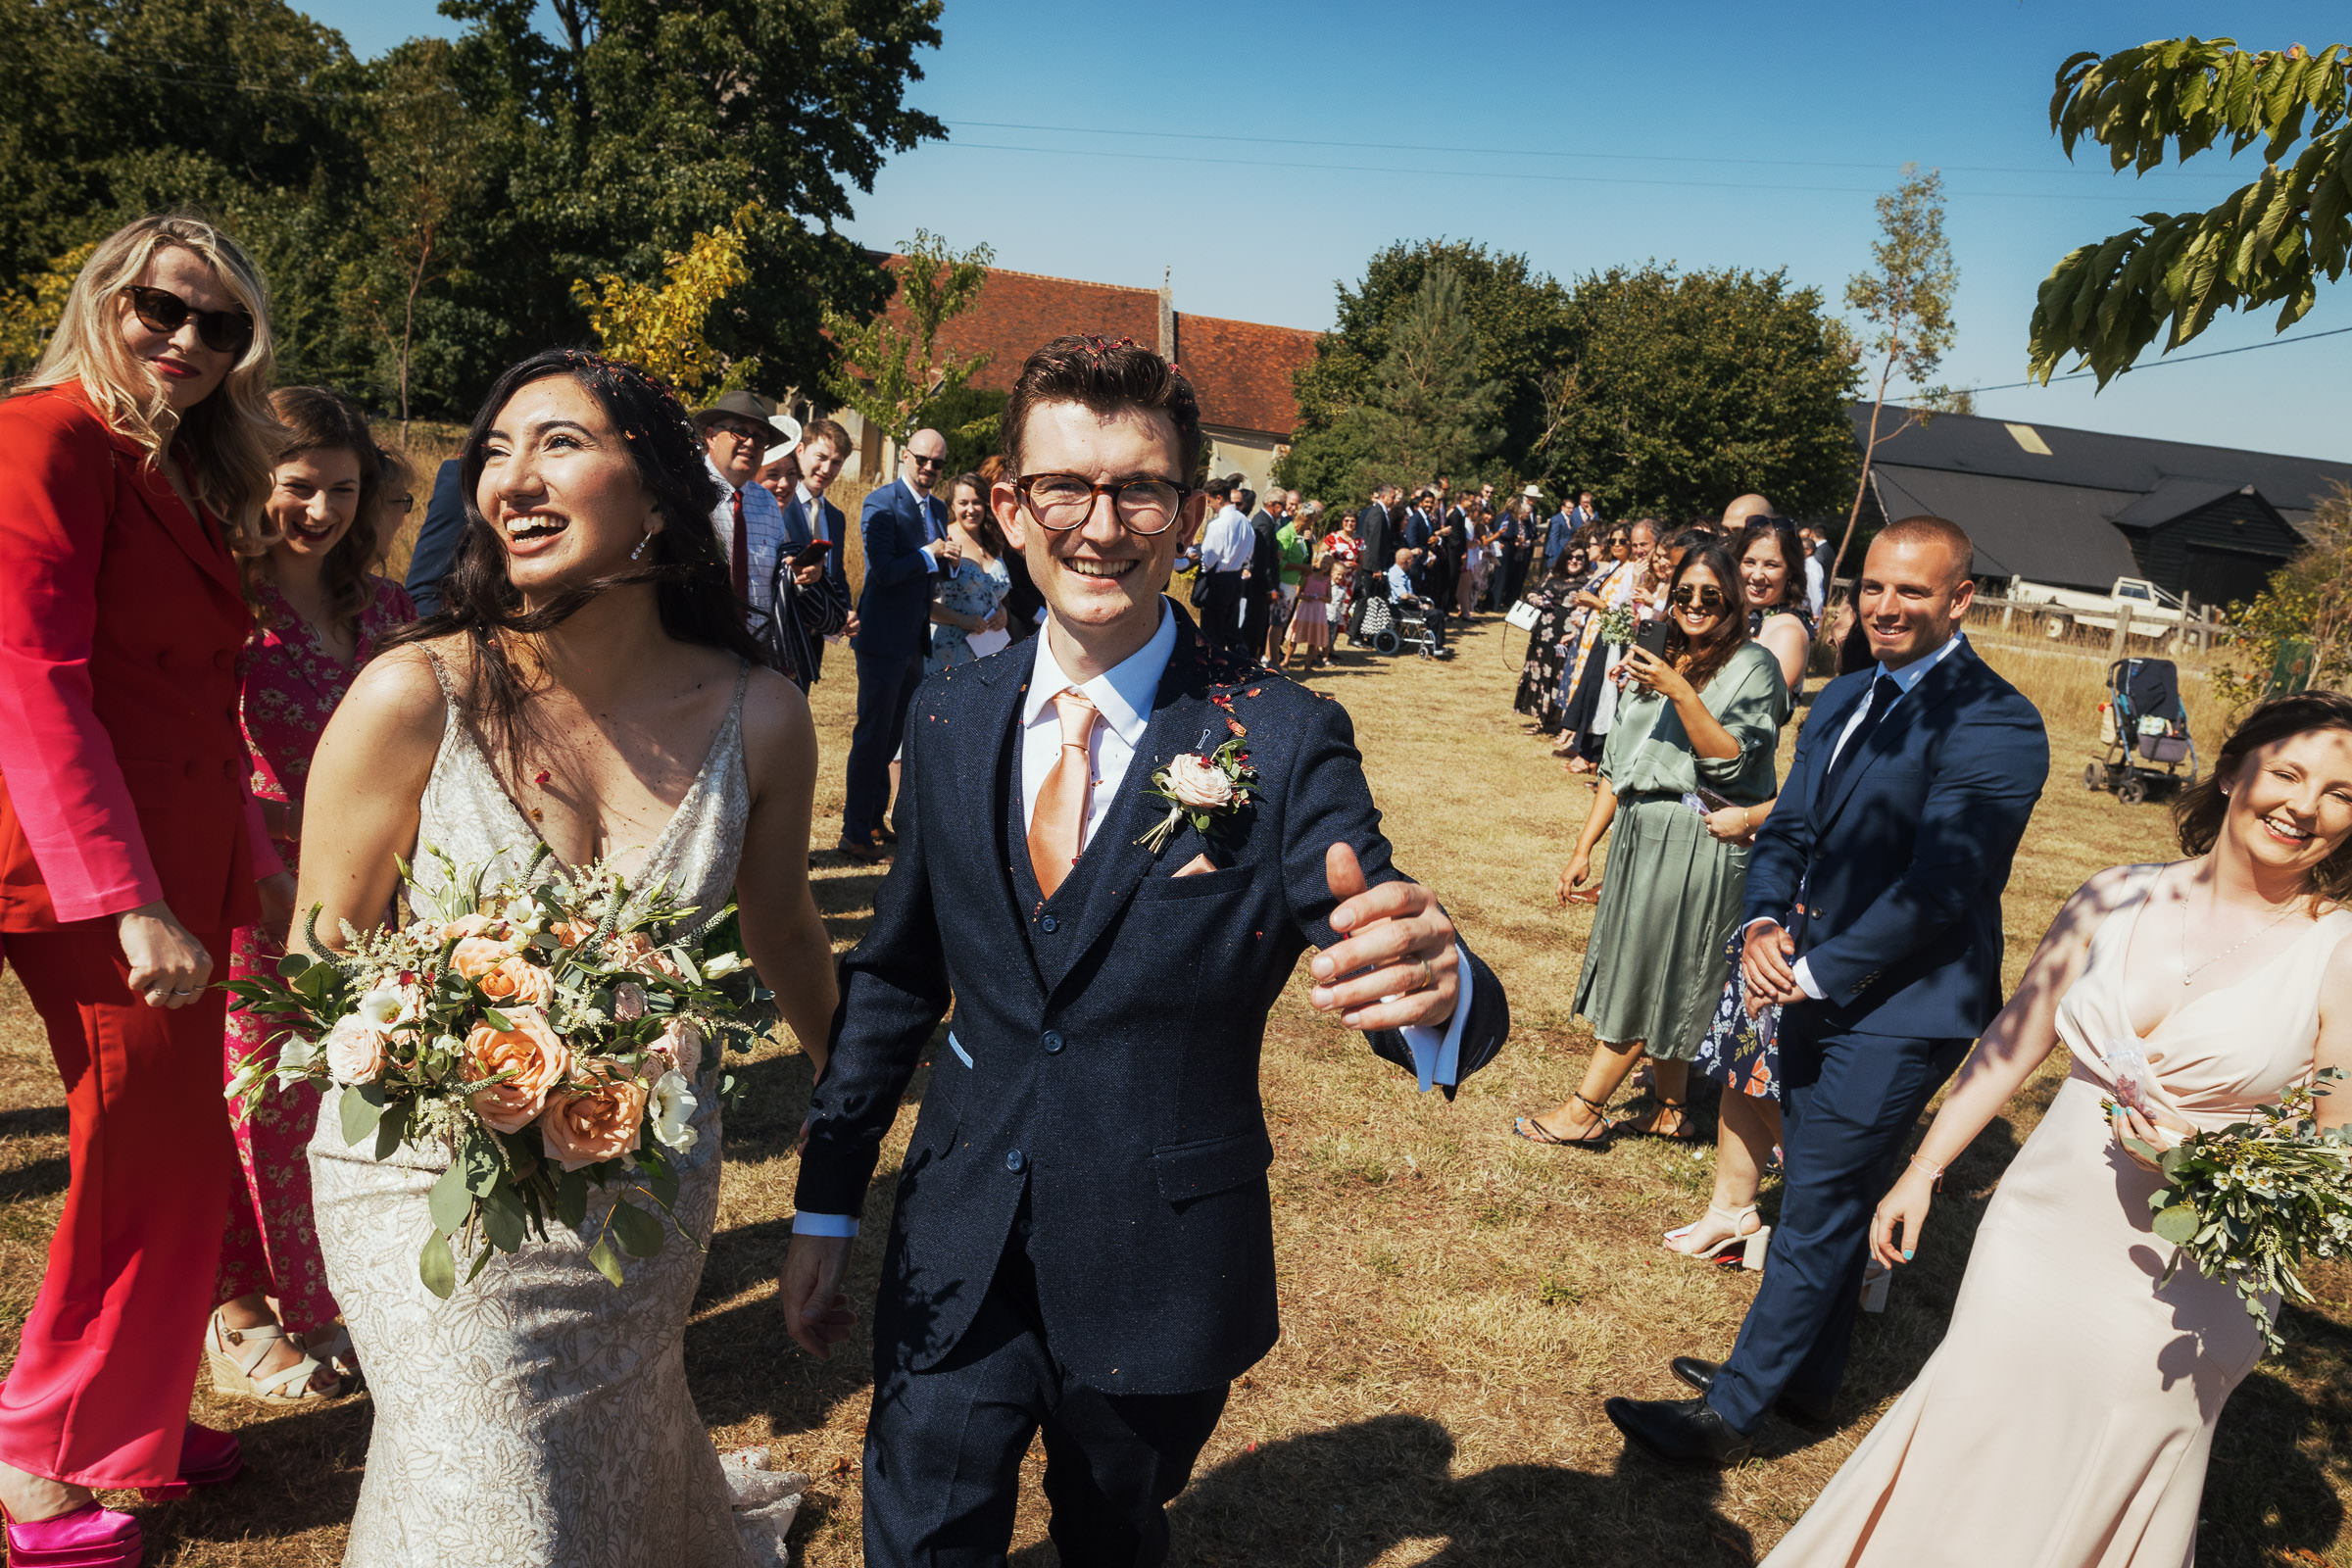 Sunny day and blue skies. At a Suffolk wedding venue called Alpheton Hall Barns a couple walk through confetti thrown by their guests who are in two lines. The bride is laughing.